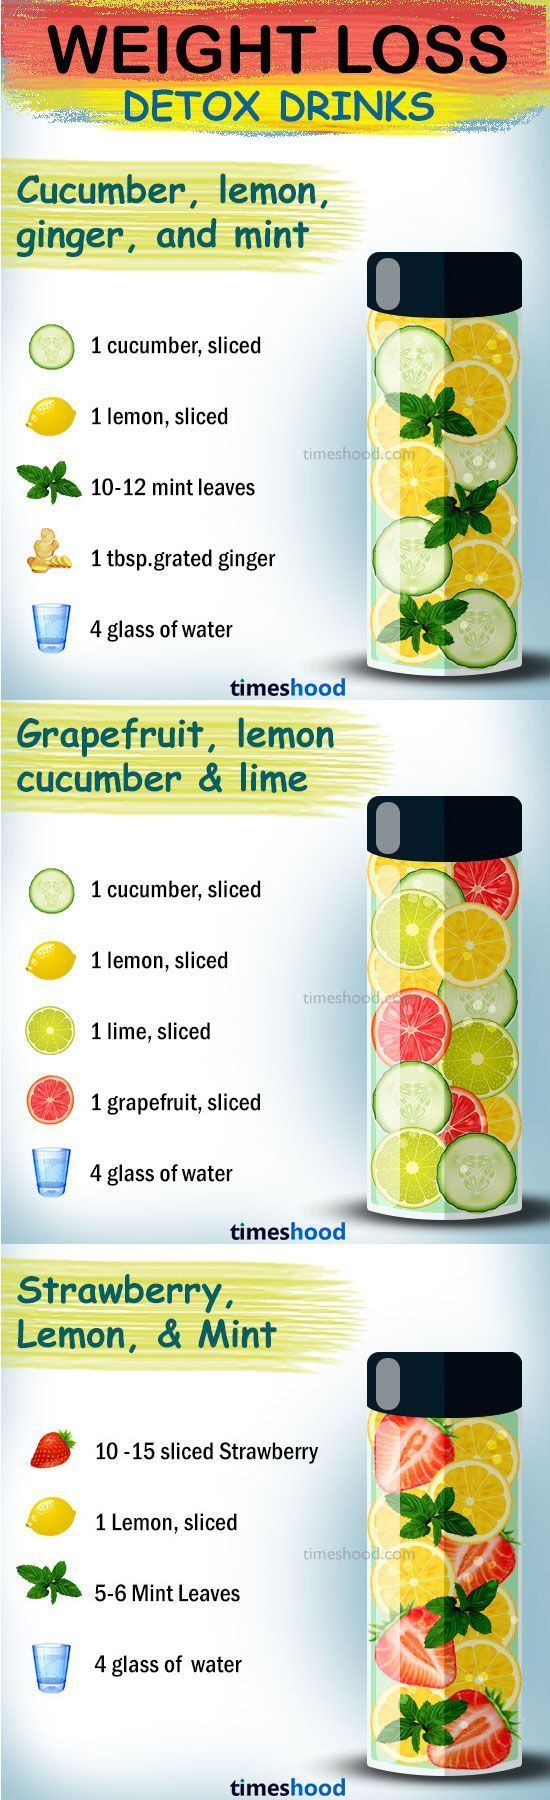 What to drink to lose weight? Best Detox water recipe for weight loss. Add these drinks in your menu to achieve your weight loss goal fast. Check out here 15 effective weight loss drinks that works fast. Smoothies, Detox, Infused Water, Detox Drinks, Healthy Recipes, Detox Drinks Cucumber, Detox Water Recipes, Best Detox Water, Detox Water